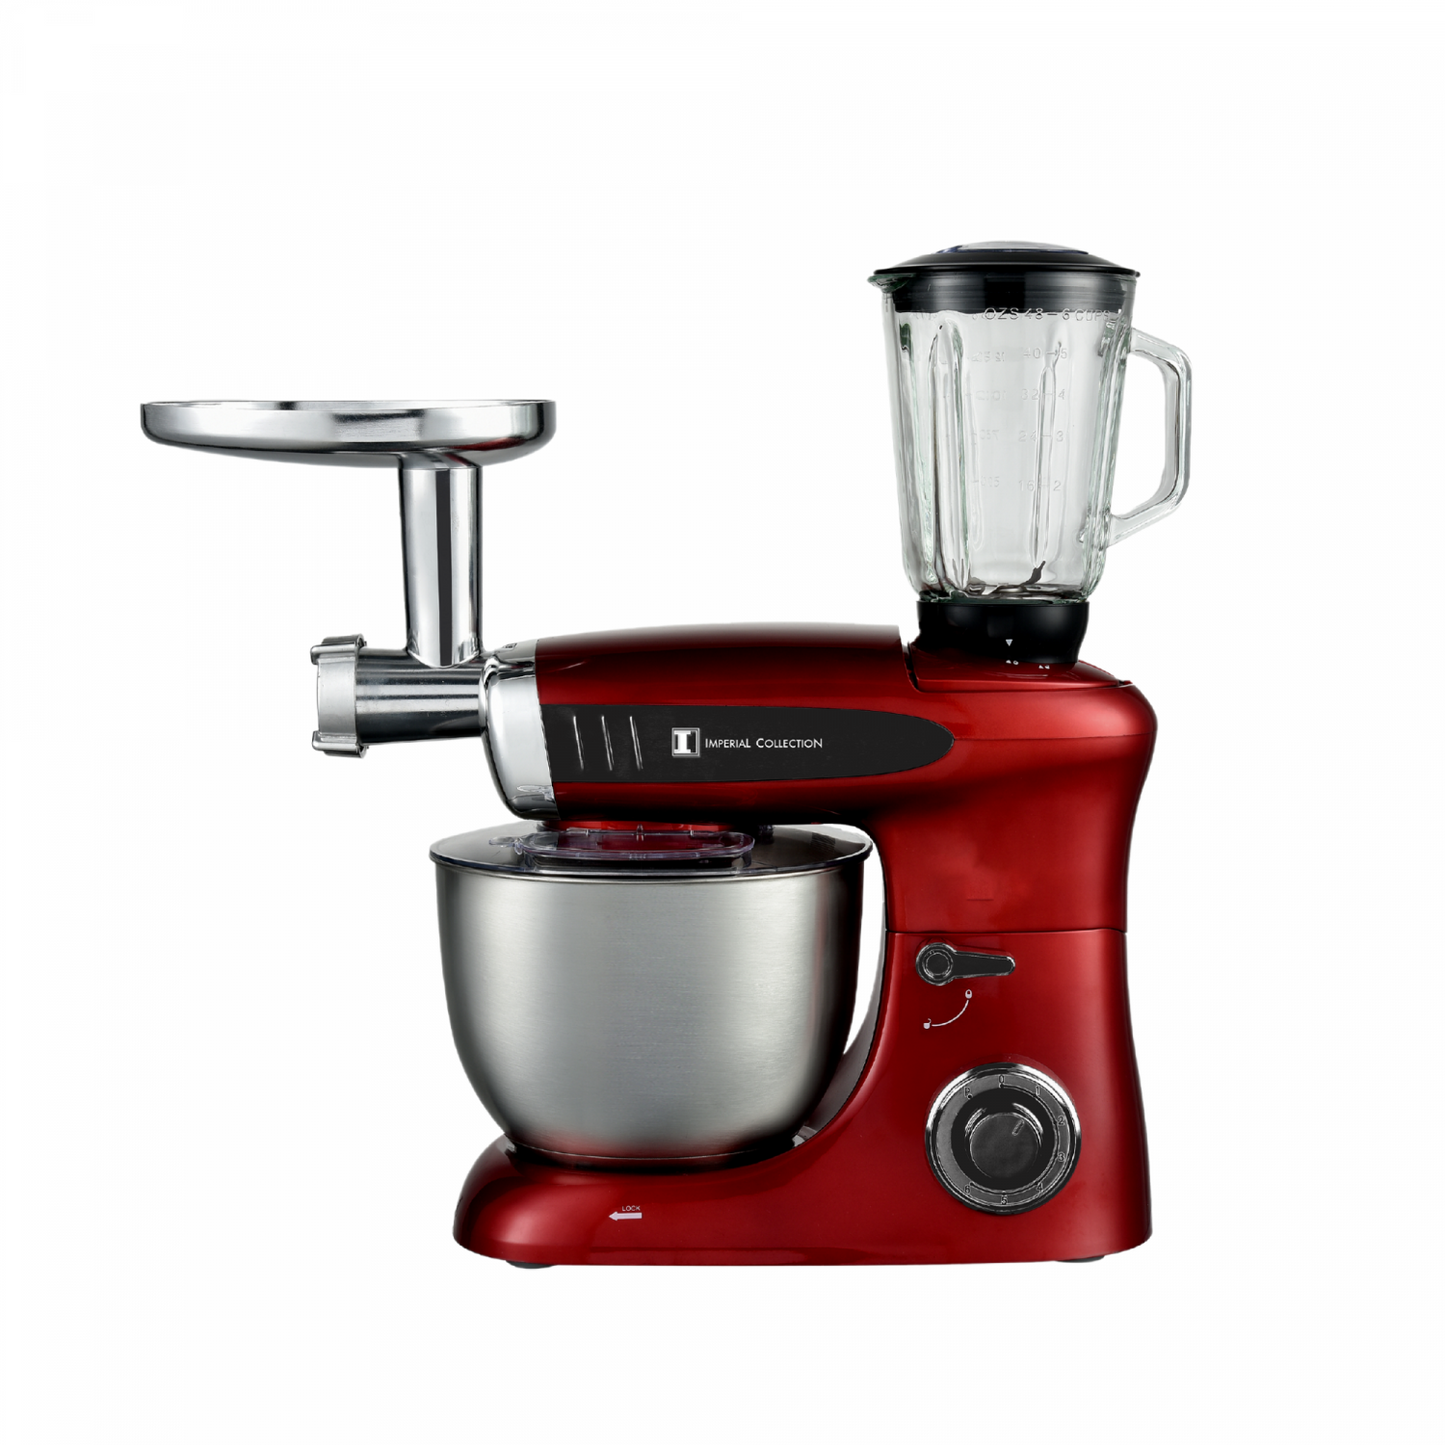 Imperial Collection Multifunctional Stand Mixer, Blender, Meat Grinder Red